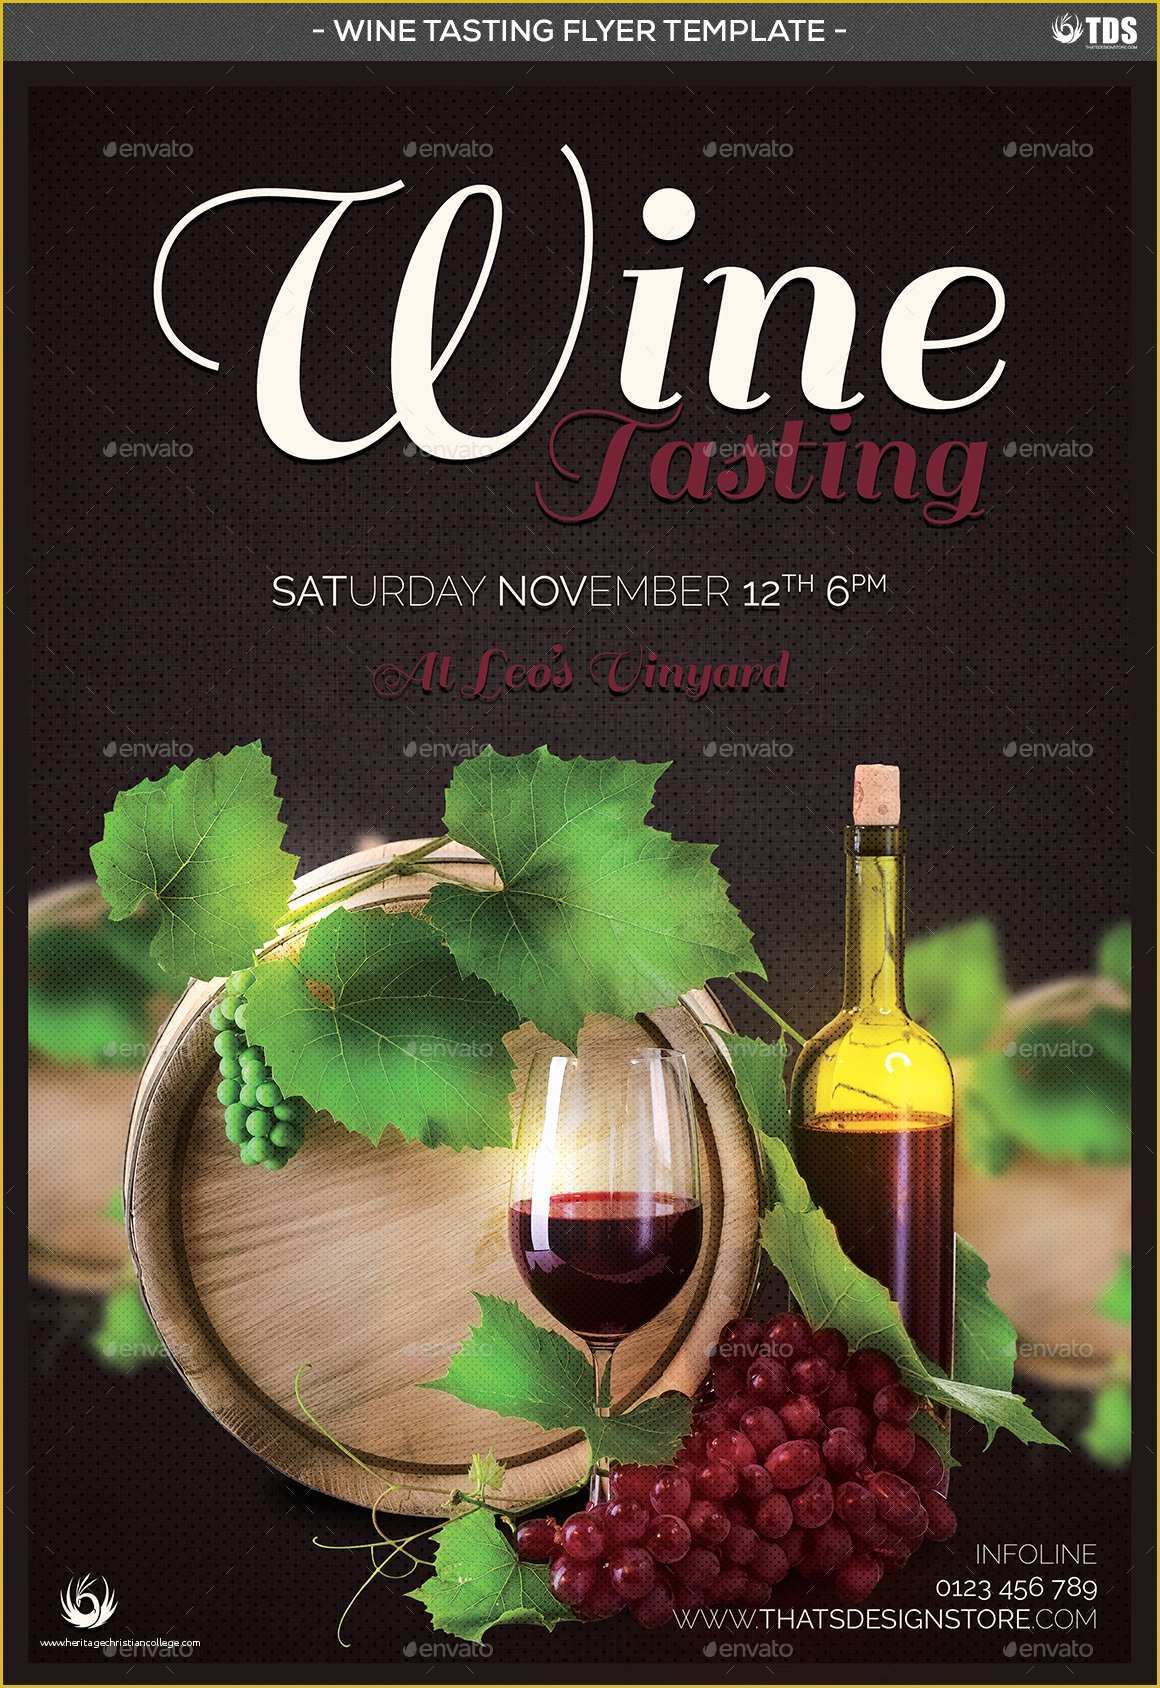 Free Wine Tasting Flyer Template Of Wine Tasting Flyer Template by Lou606